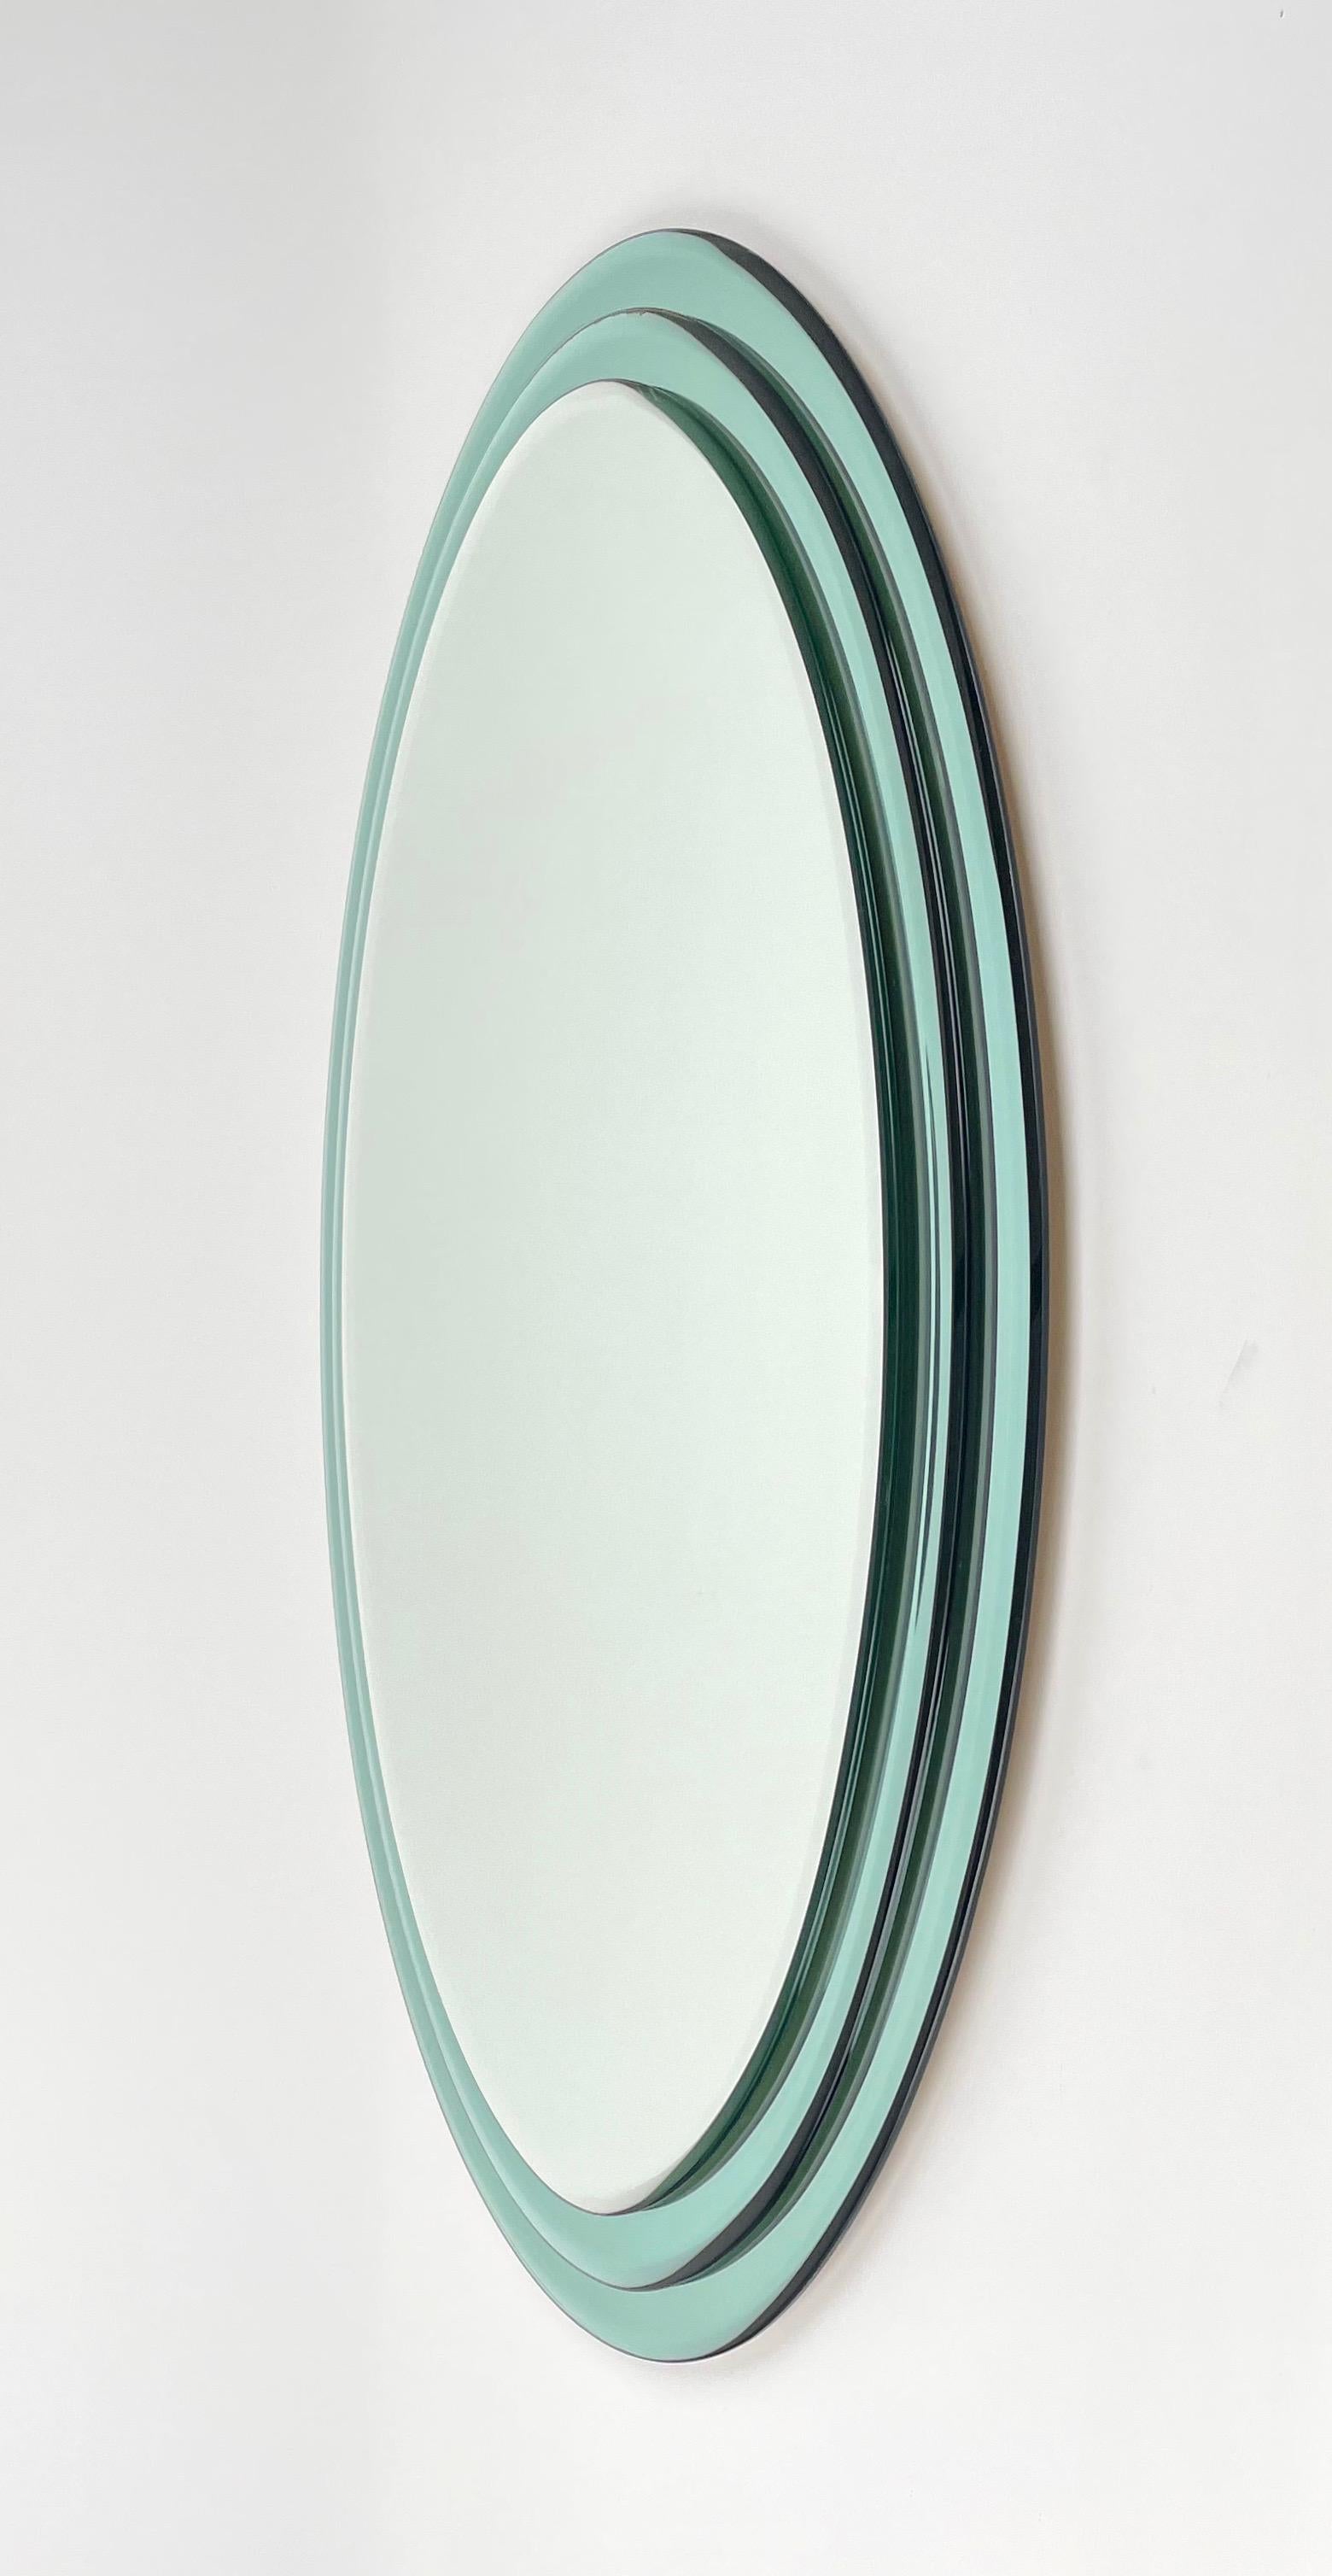 Late 20th Century Mid-Century Oval Wall Mirror Three Level Fontana Arte style, Italy 1970s For Sale